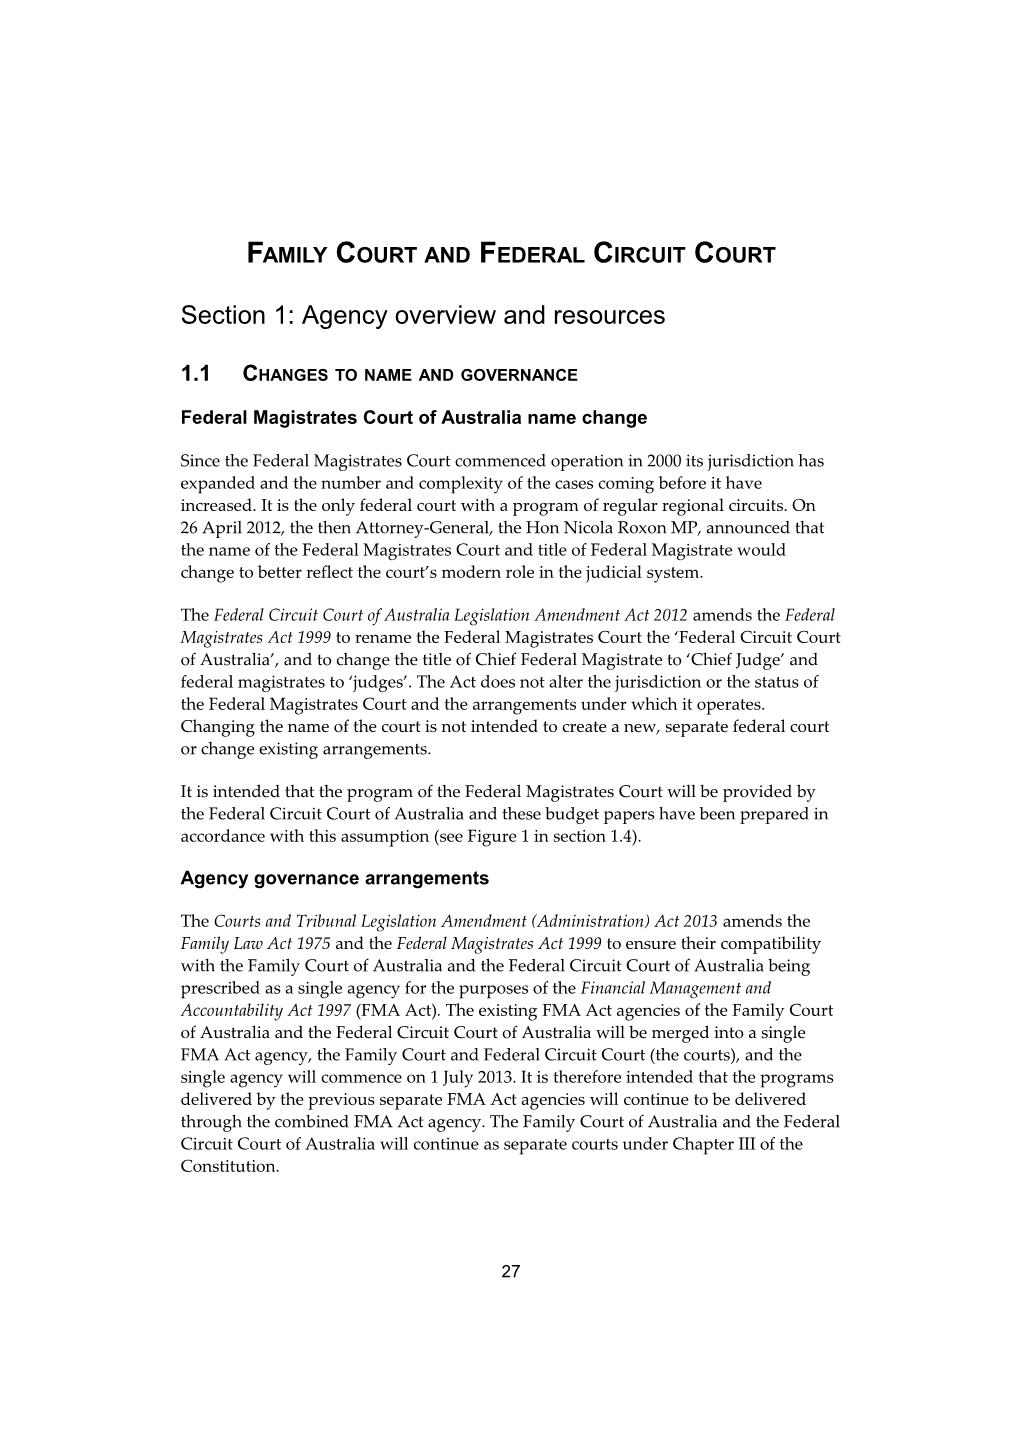 PBS 2013-14 Family Court and Federal Circuit Court